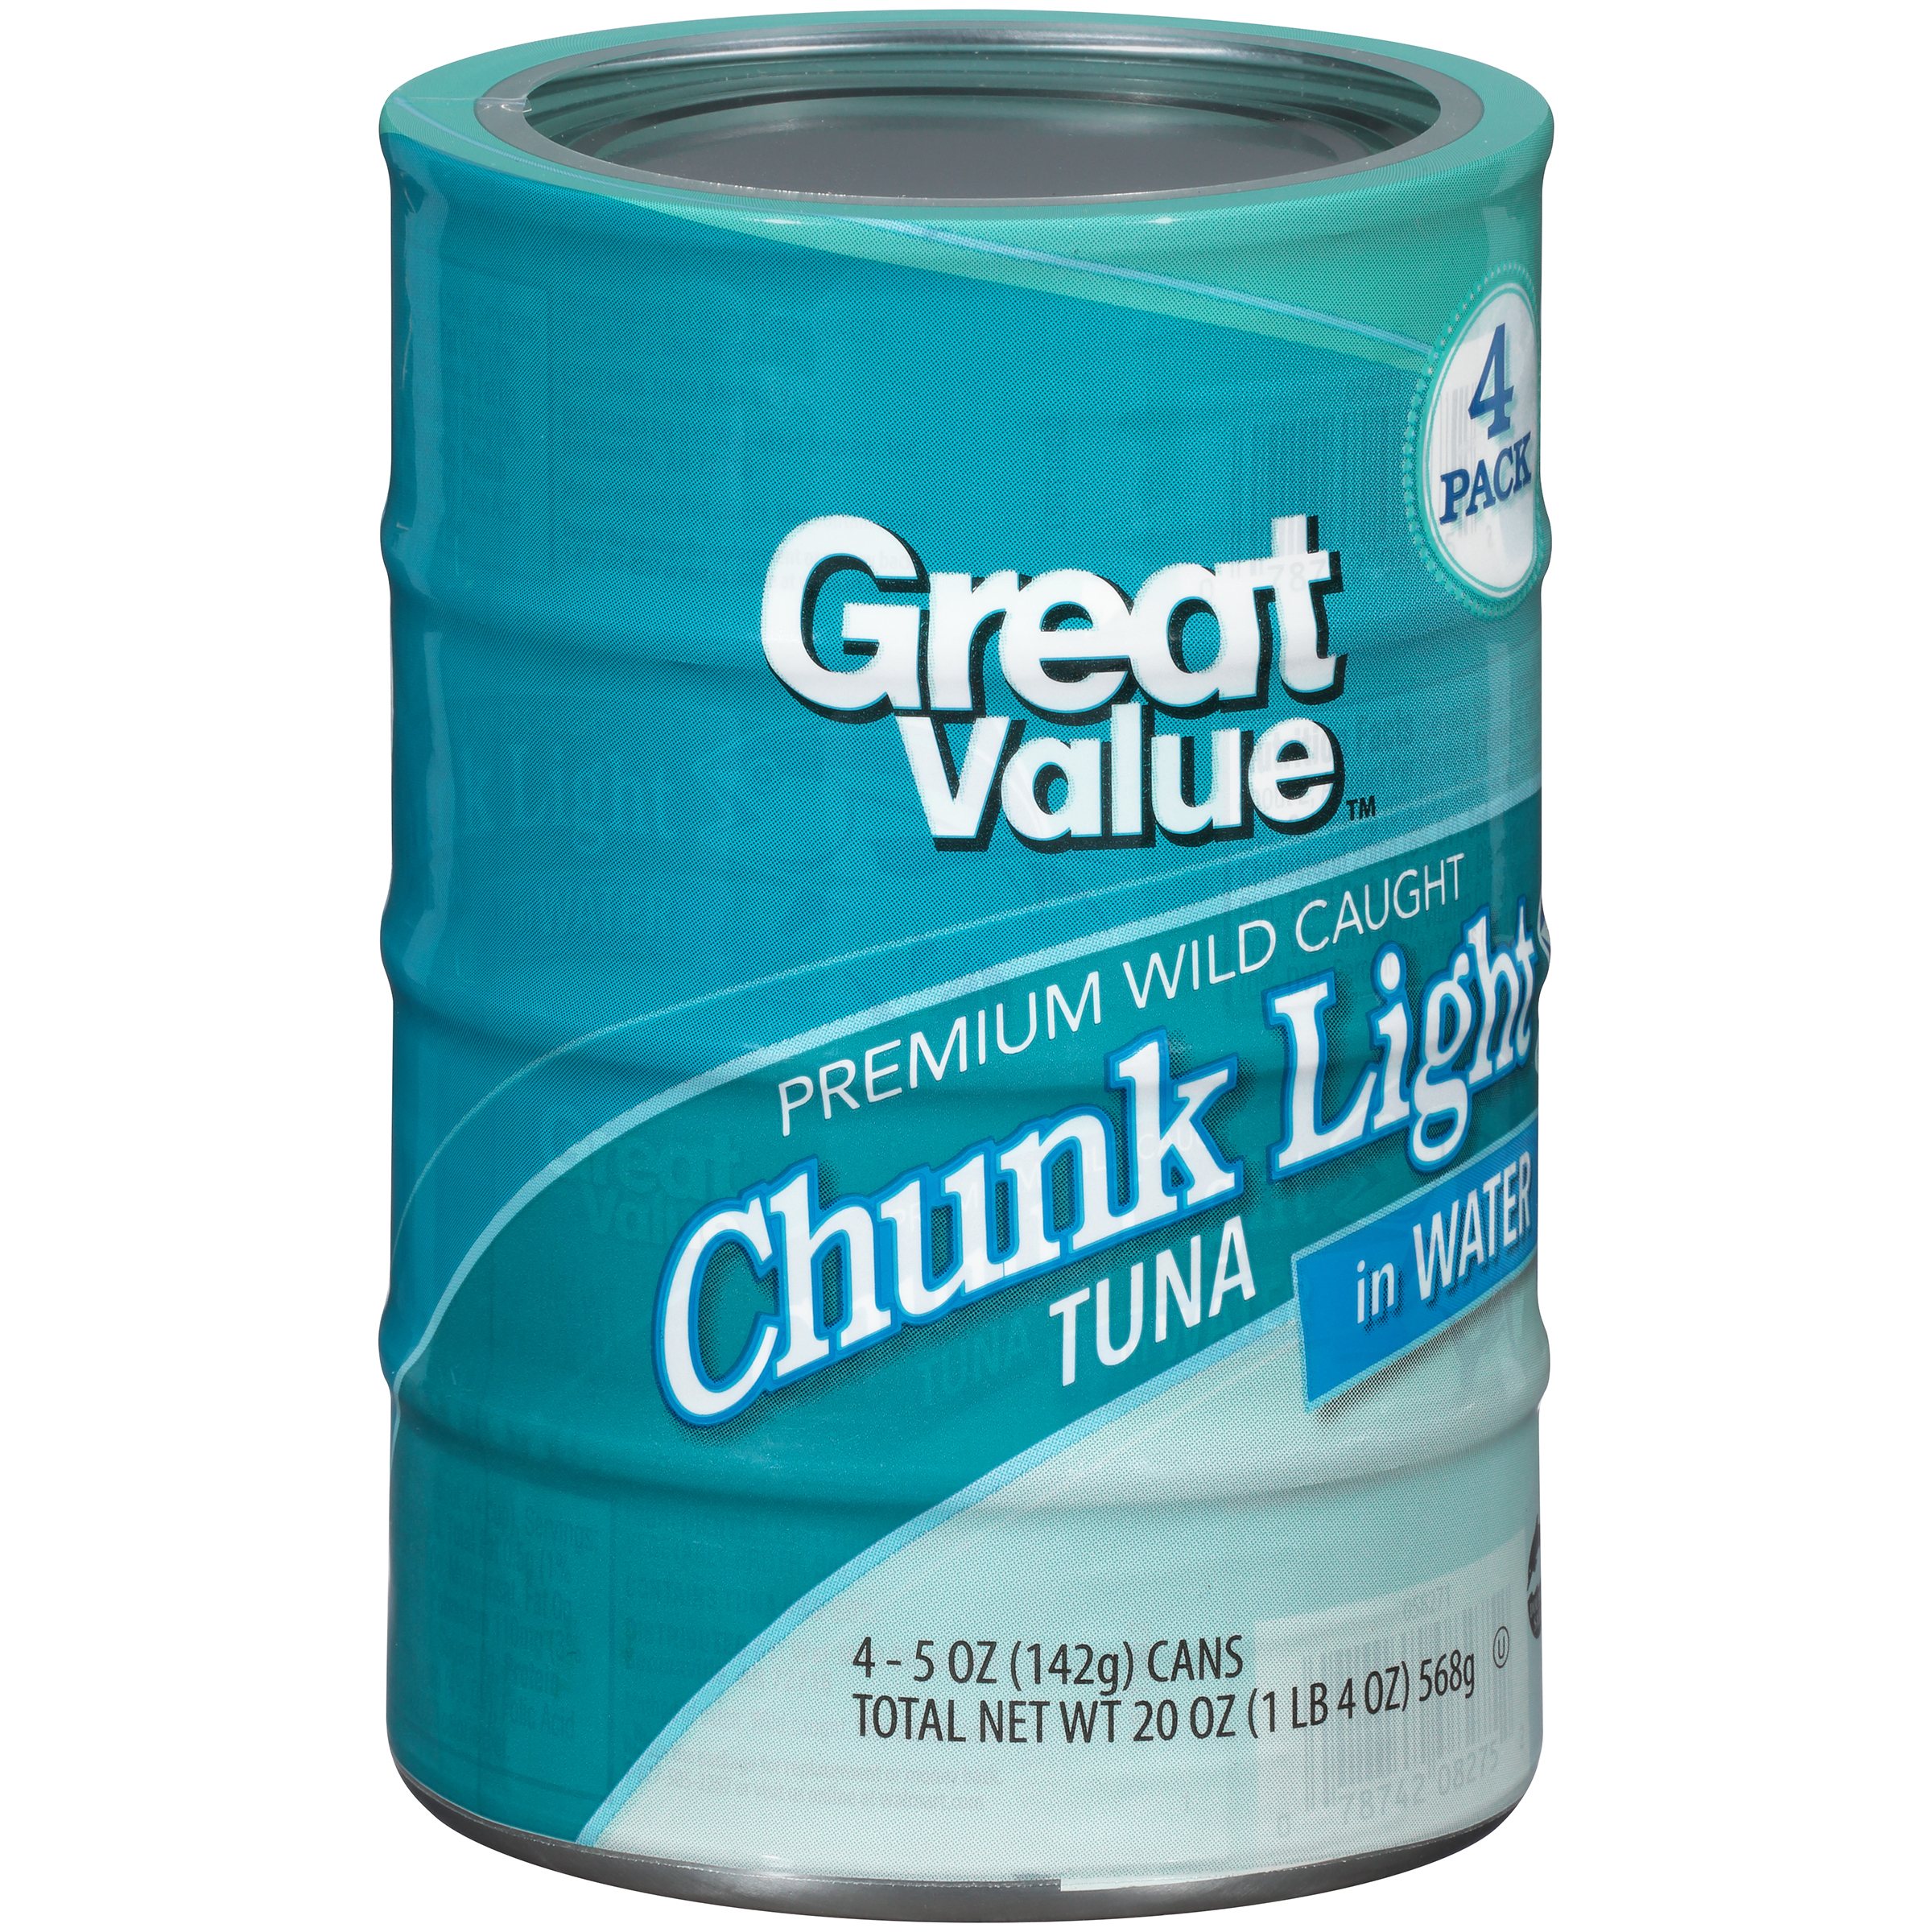 (4 Cans) Great Value Chunk Light Tuna in Water, 5 Oz